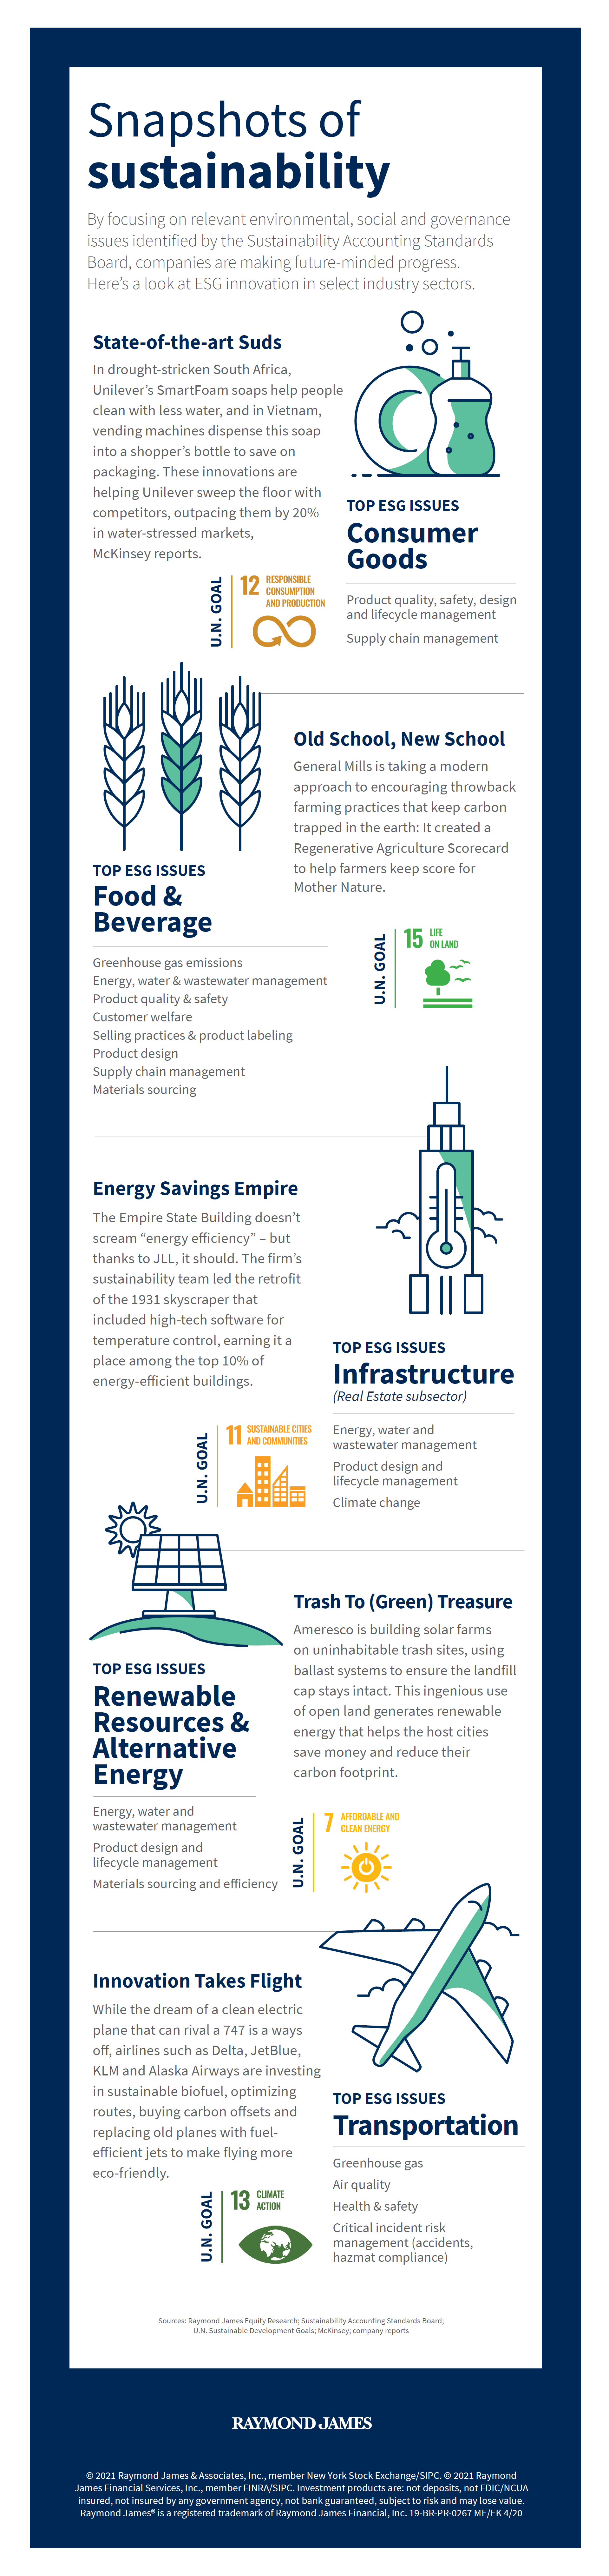 Infographic showing ESG efforts across energy, food & beverage, transportation, real estate and retail companies.